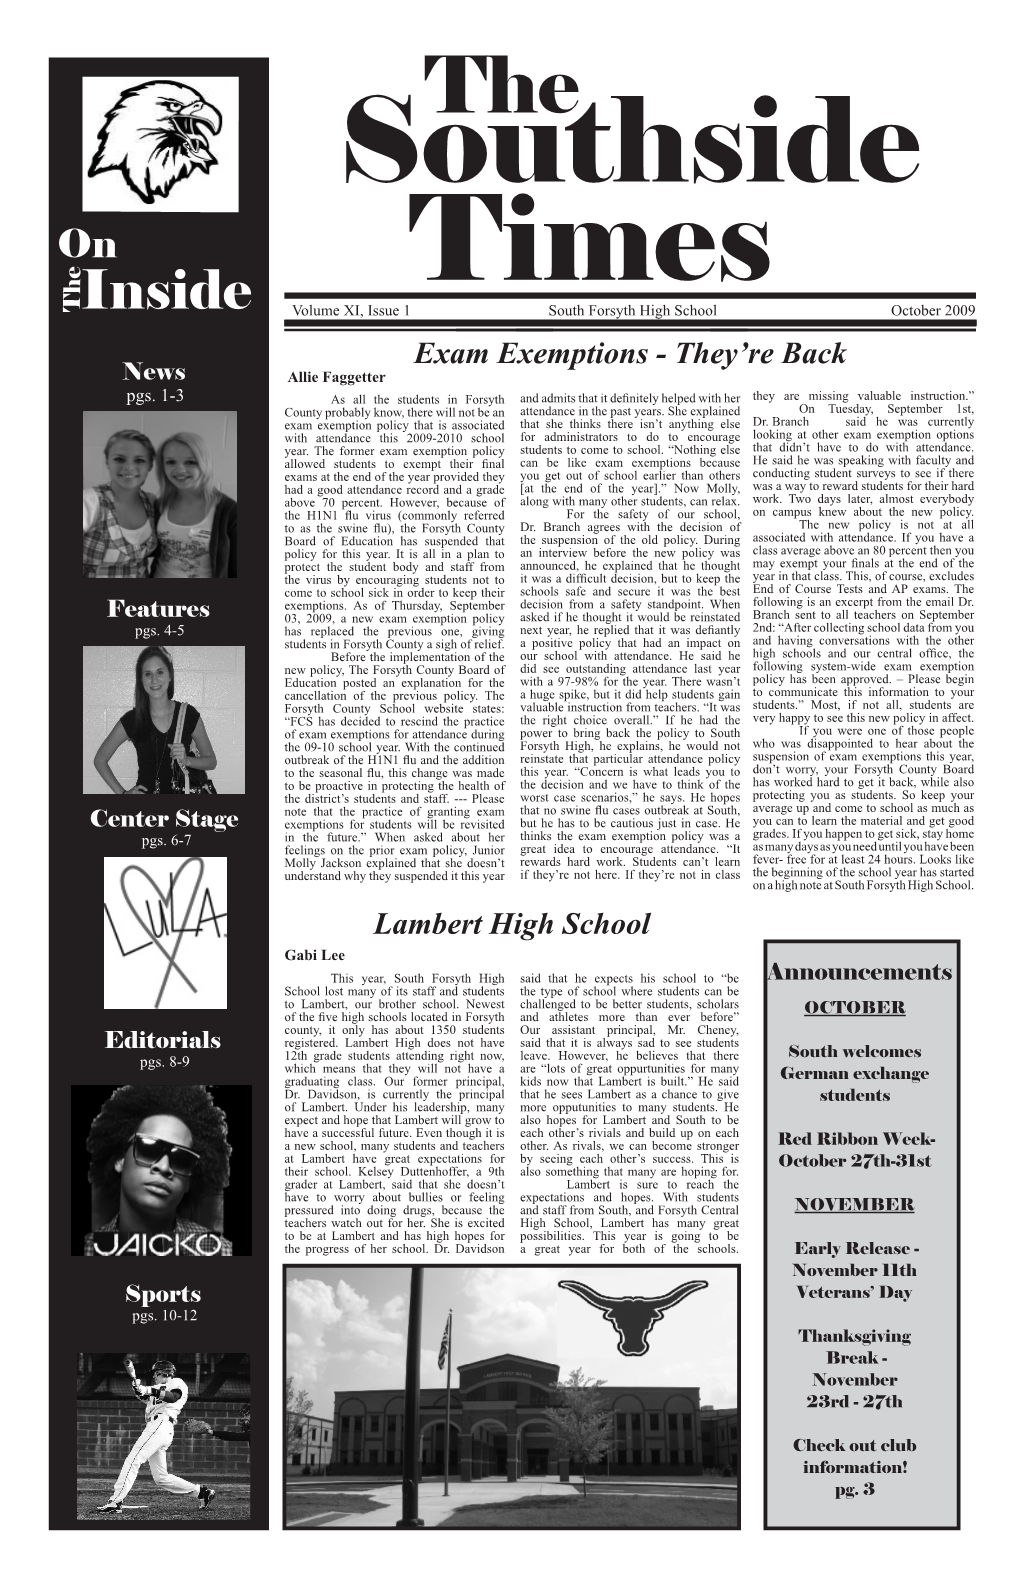 Times Inside Volume XI, Issue 1 South Forsyth High School October 2009 Exam Exemptions - They’Re Back News Allie Faggetter Pgs